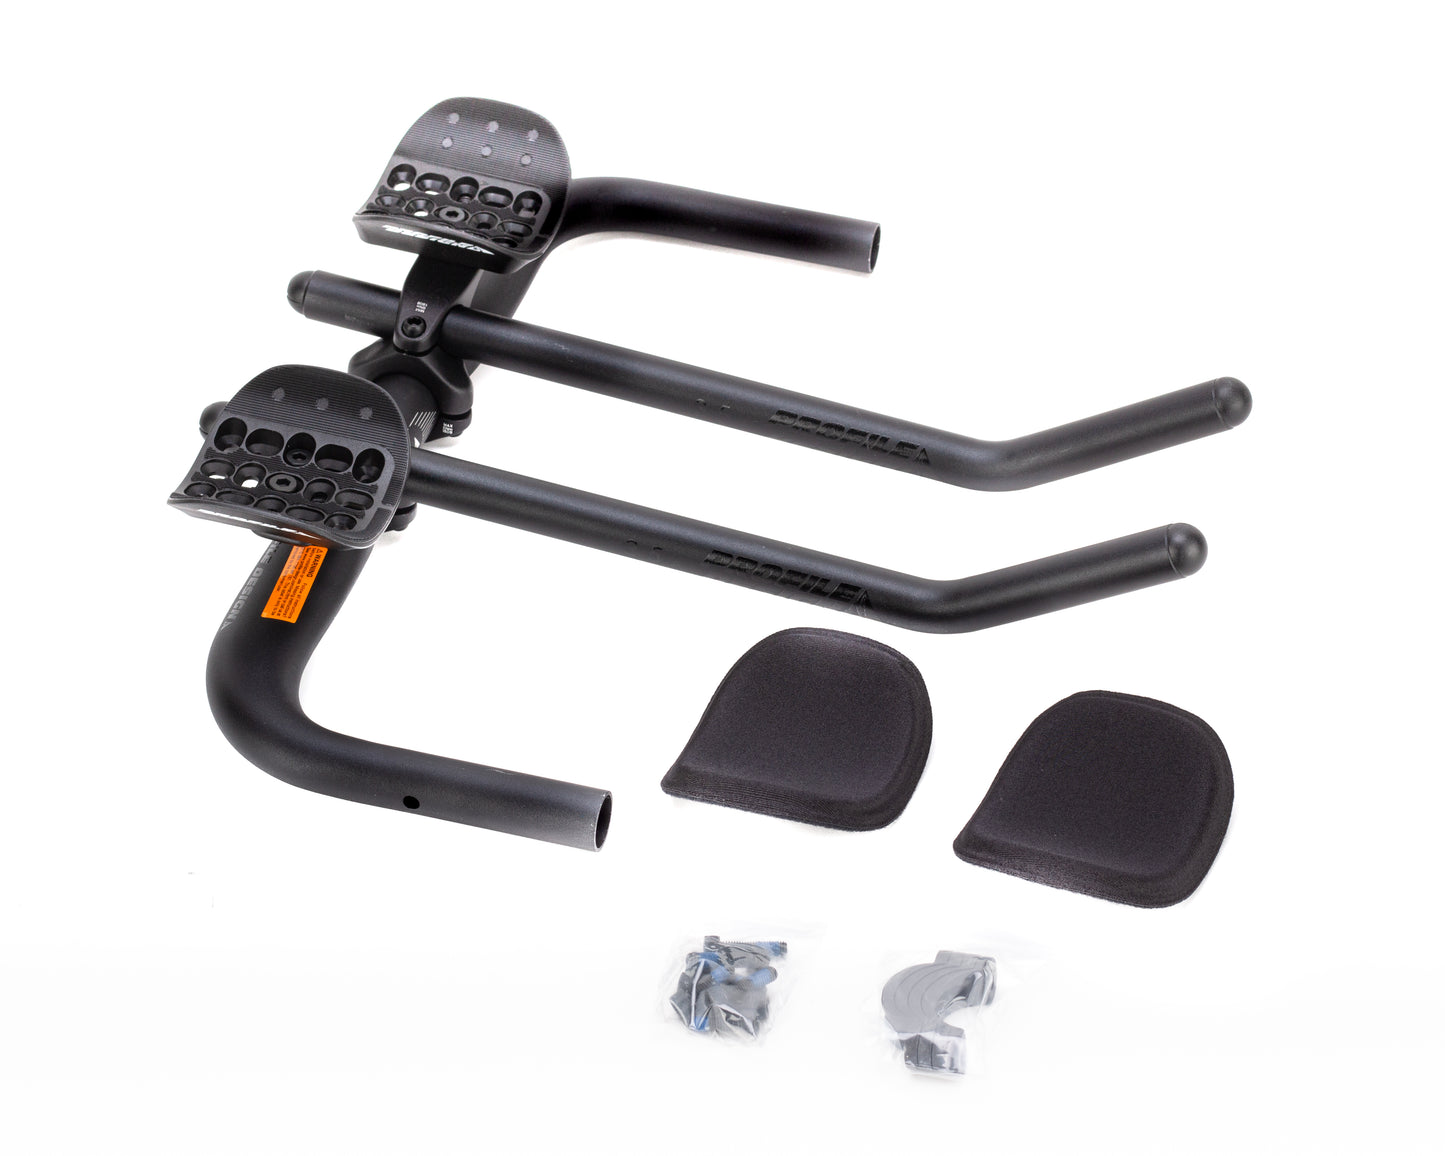 Profile design Sonic Ergo 35a and Bar Wing 10a 420mm Handlebar w/opkge